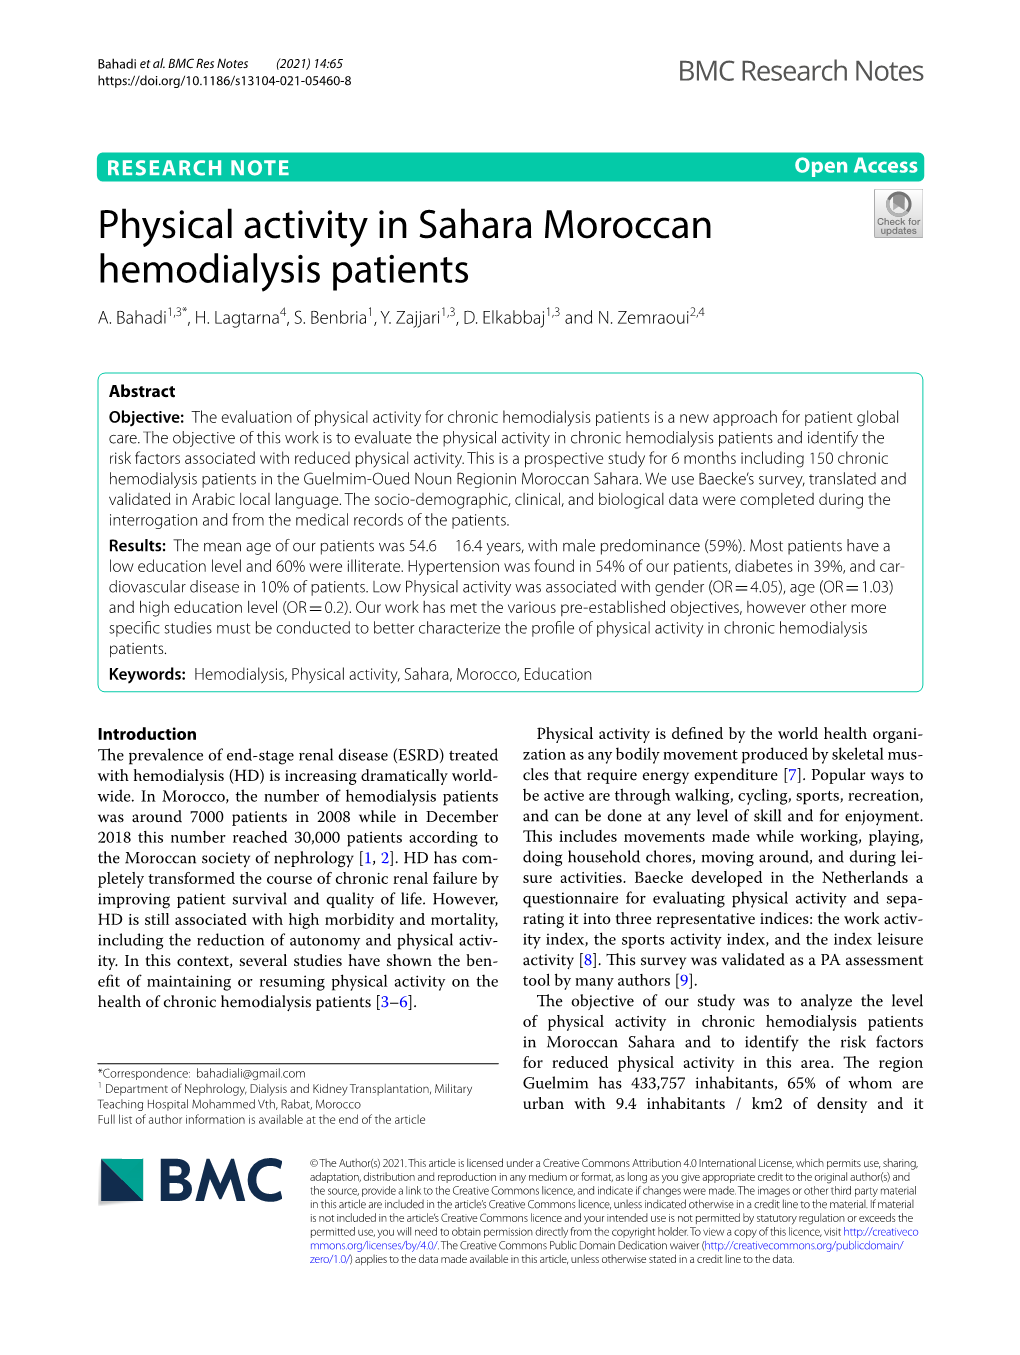 Physical Activity in Sahara Moroccan Hemodialysis Patients A